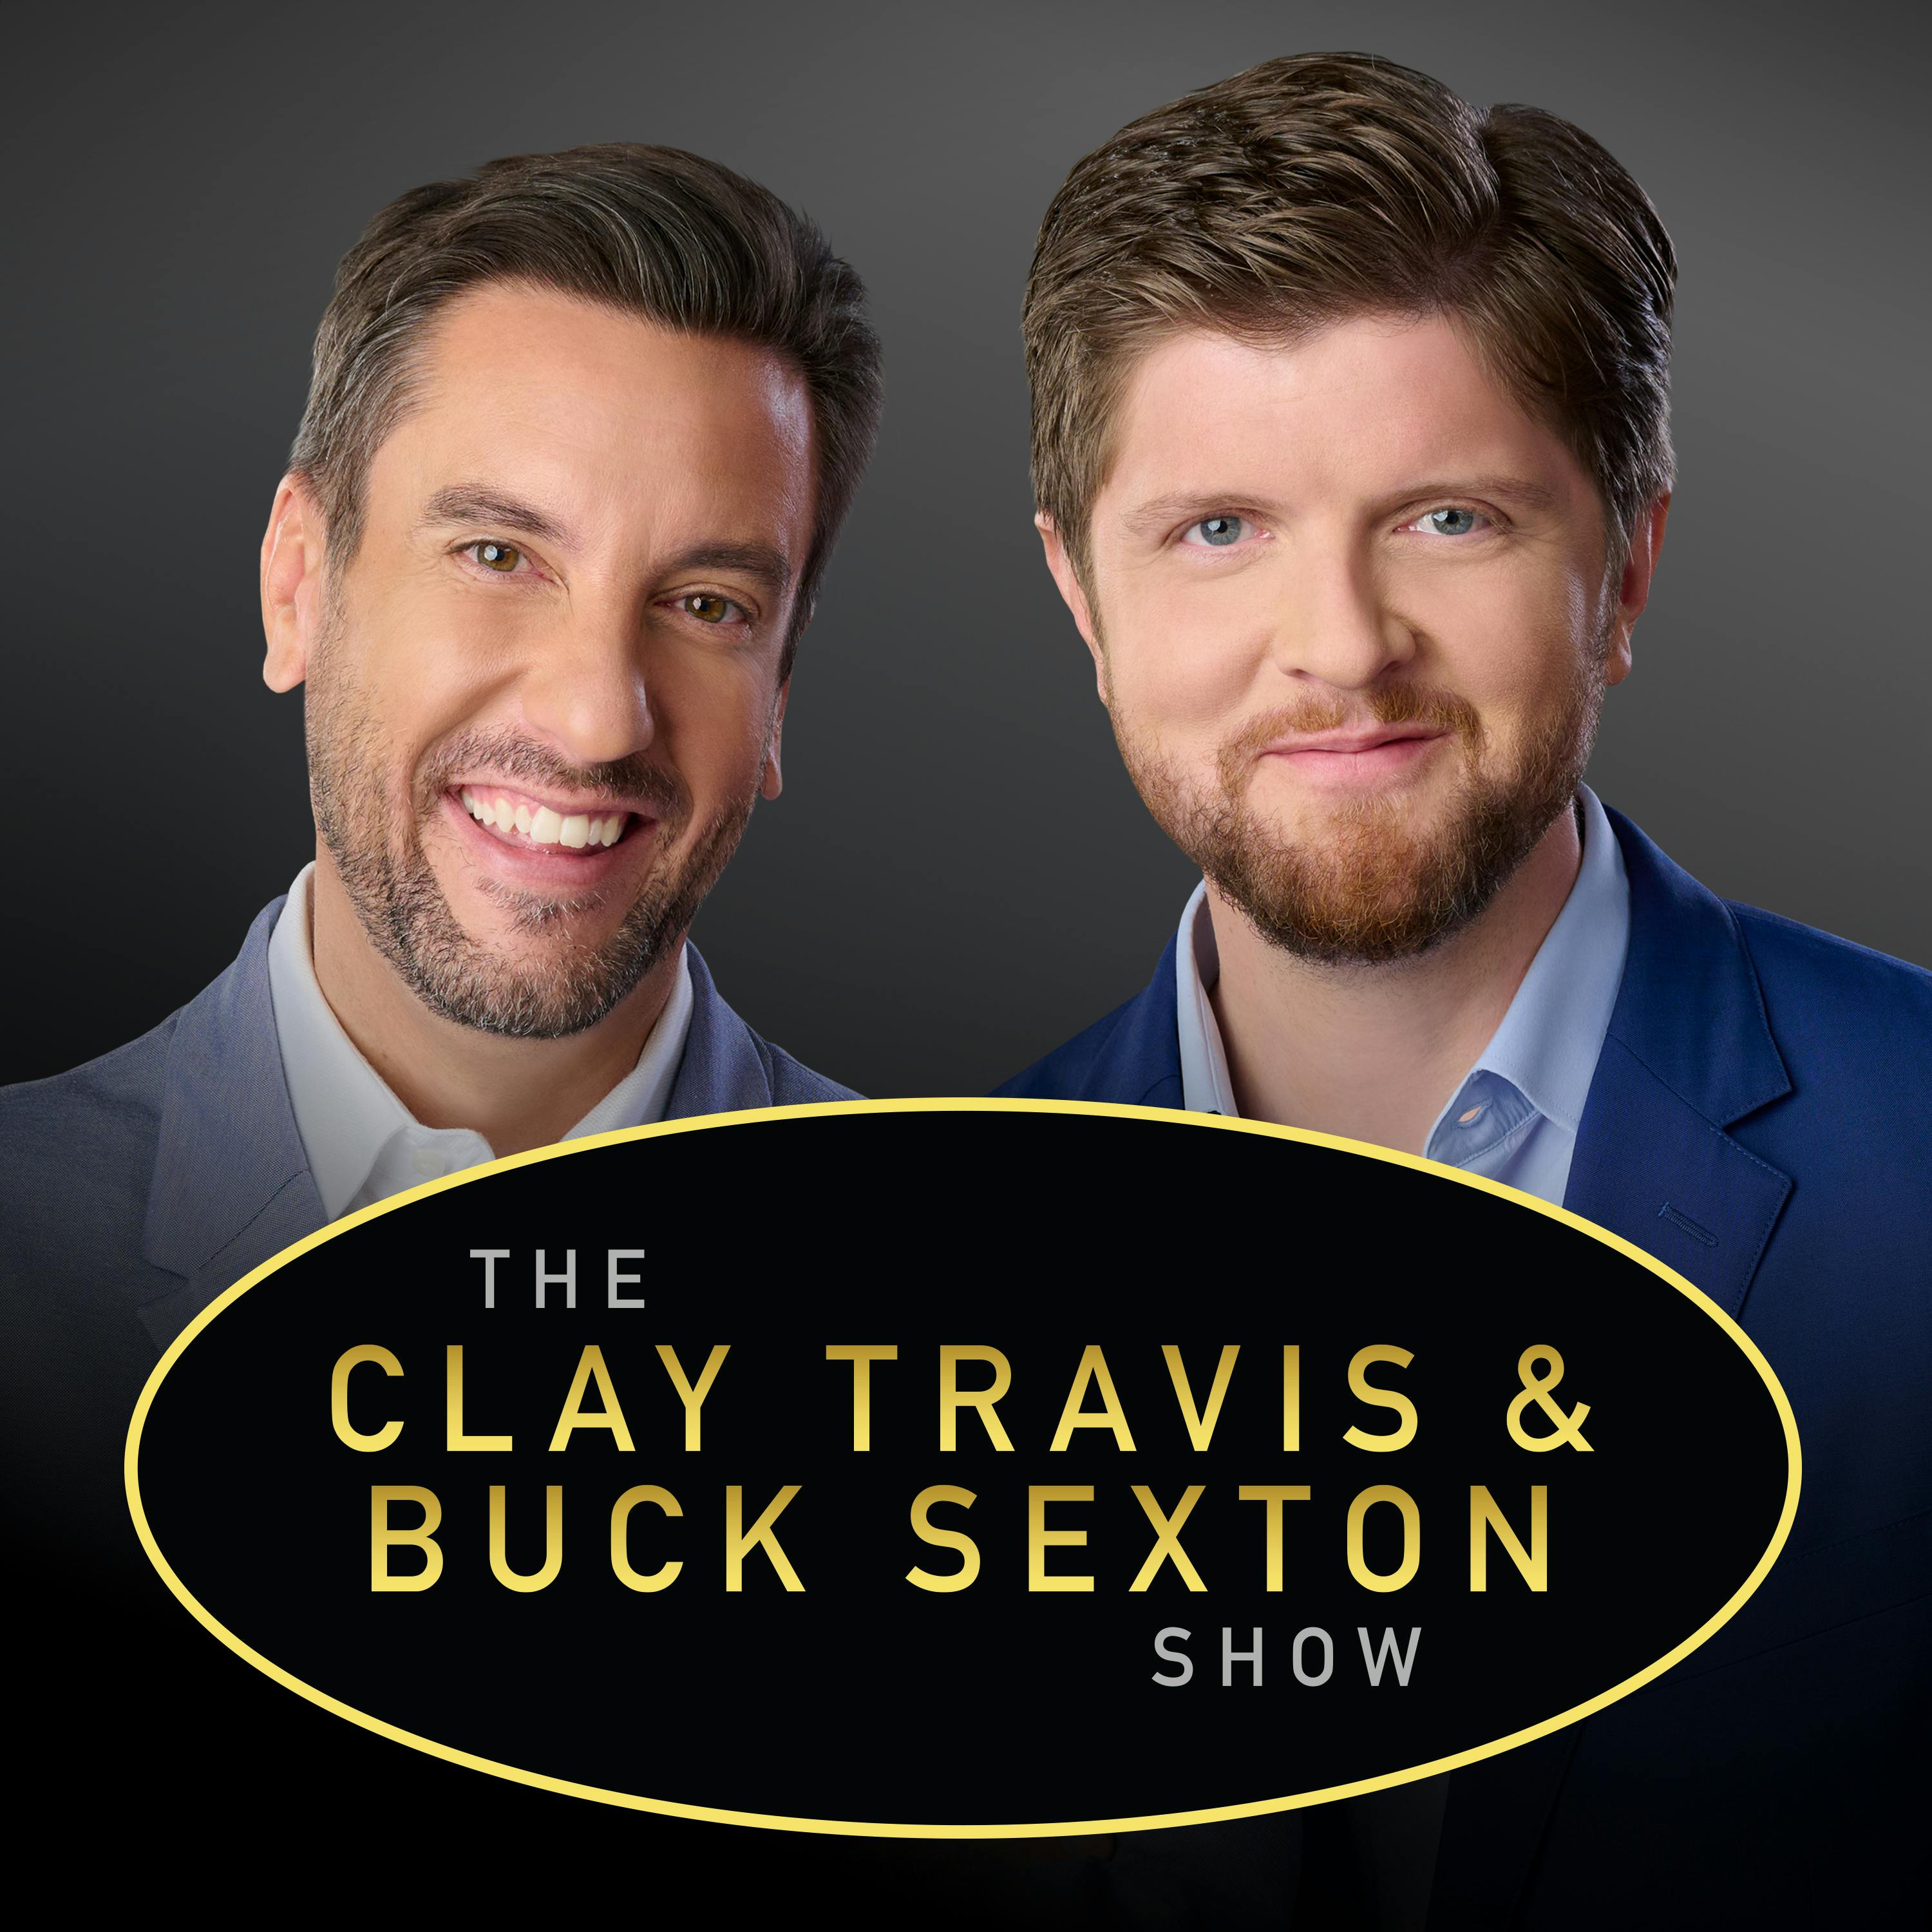 Clay Travis and Buck Sexton Show H2 – Jan 17 2022